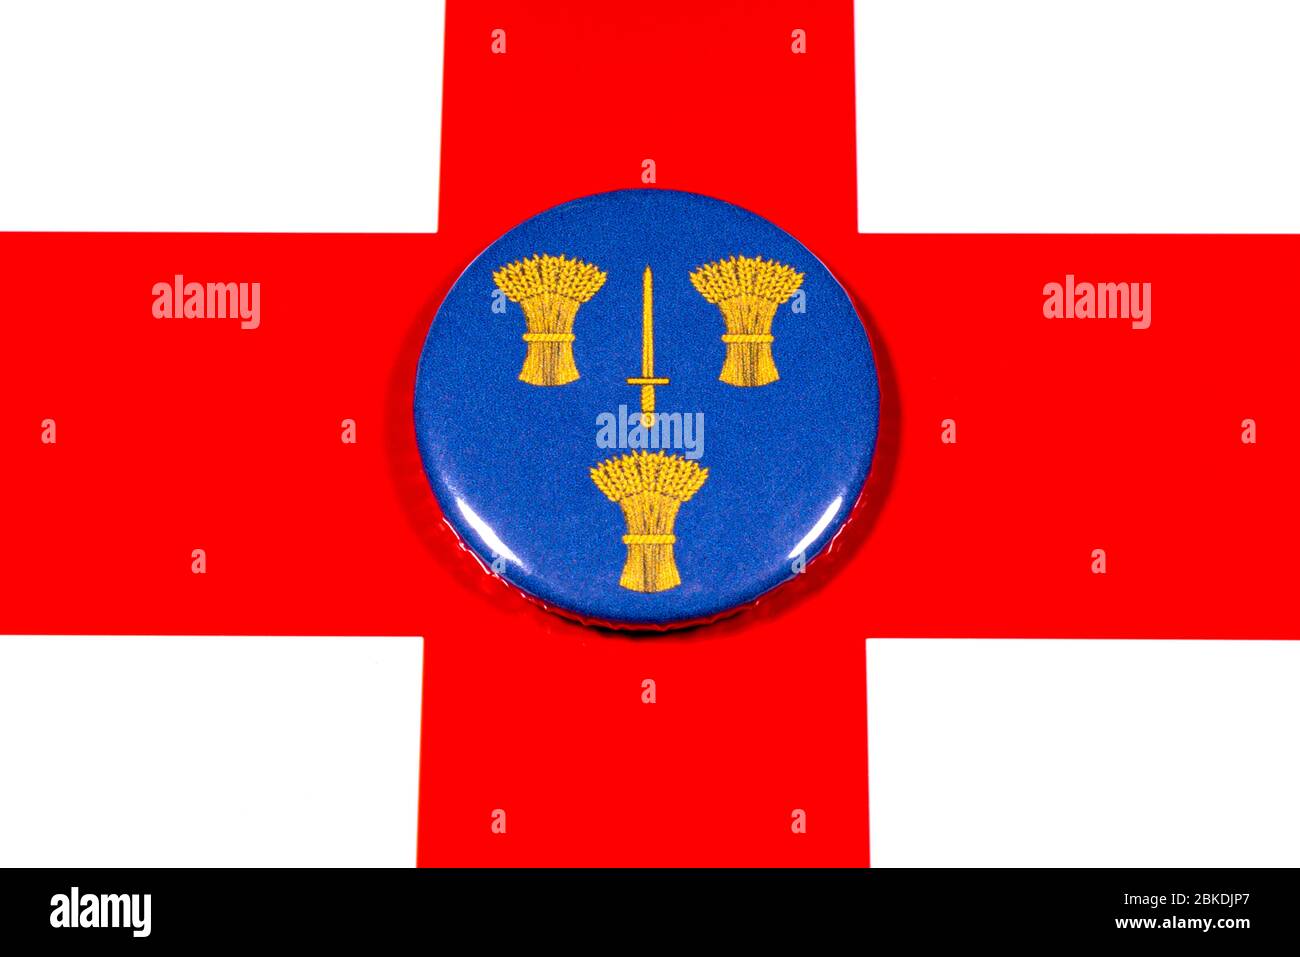 A badge portraying the flag of the English county of Cheshire pictured over the England flag. Stock Photo